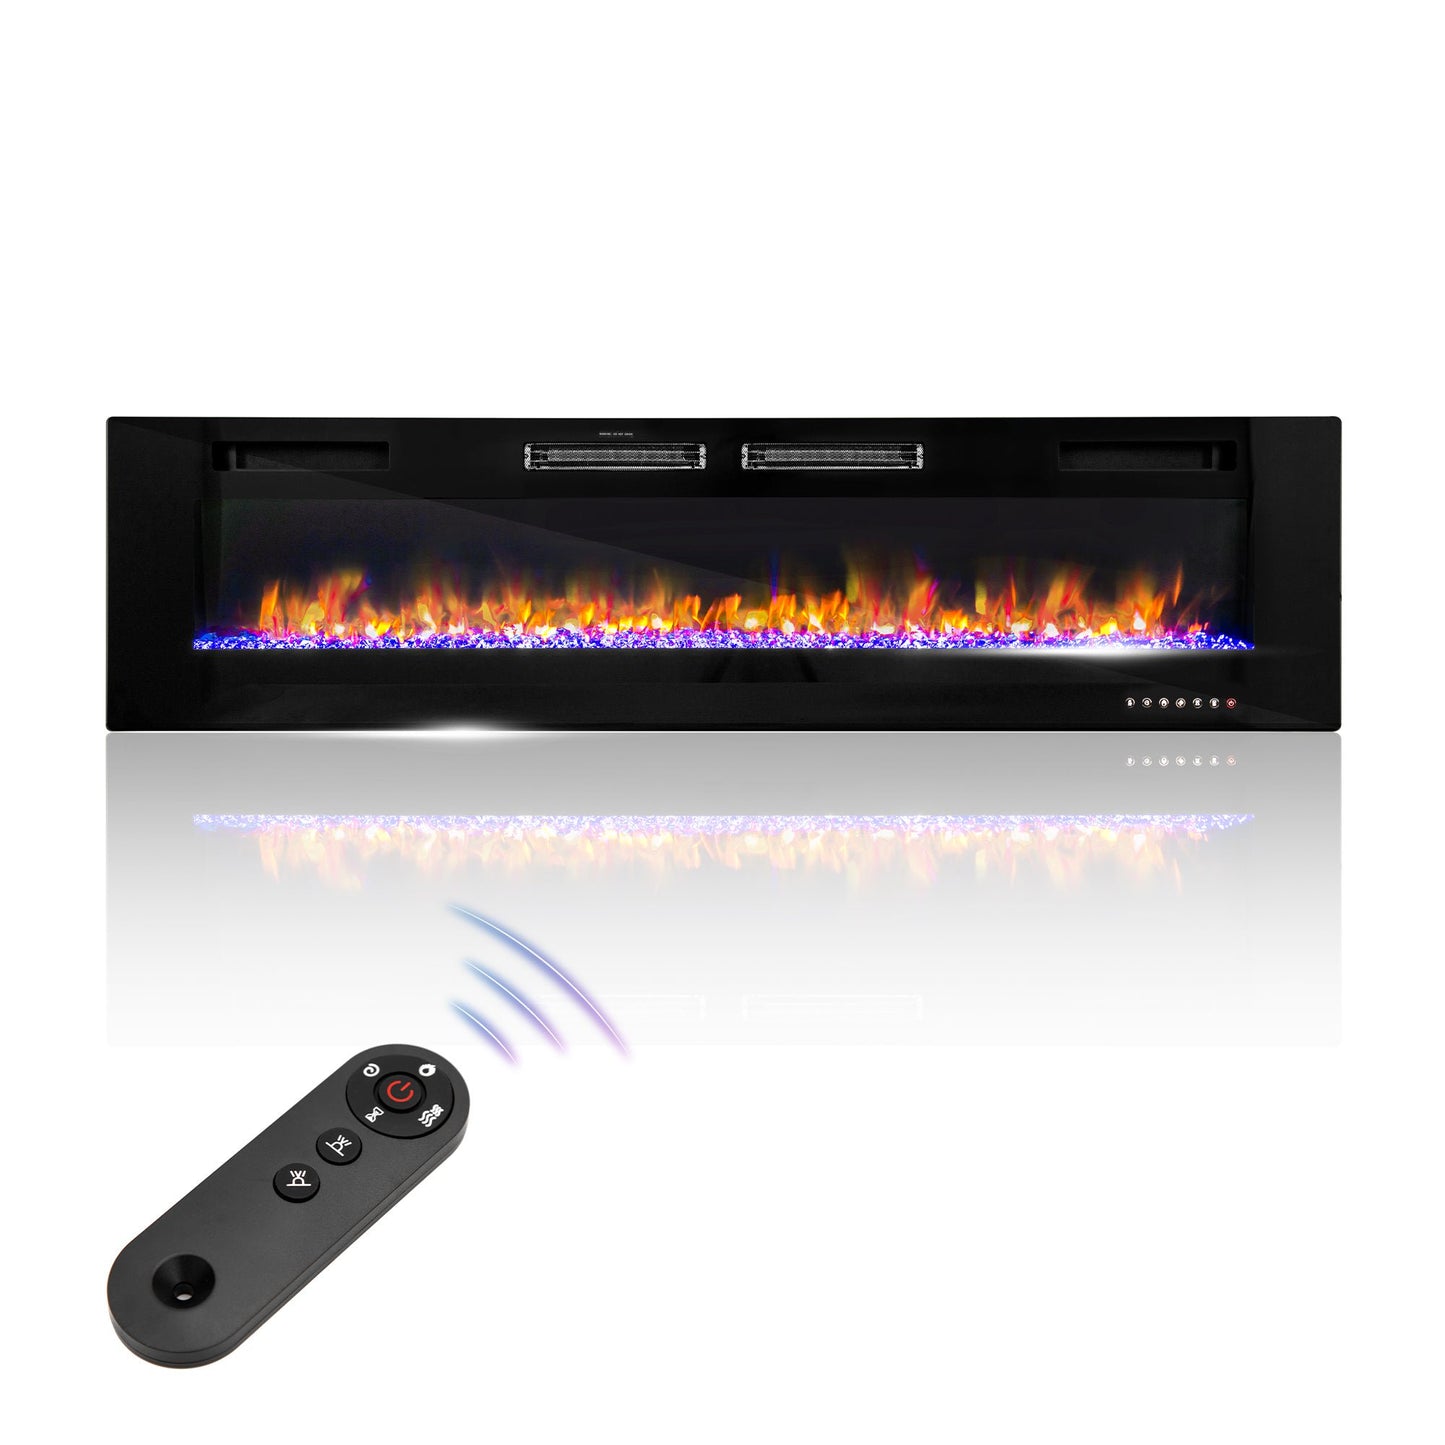 Sophia & William 72 inch Electric Fireplace,Recessed Wall Mounted Fireplace Insert,Ultra-Thin Linear Fireplace